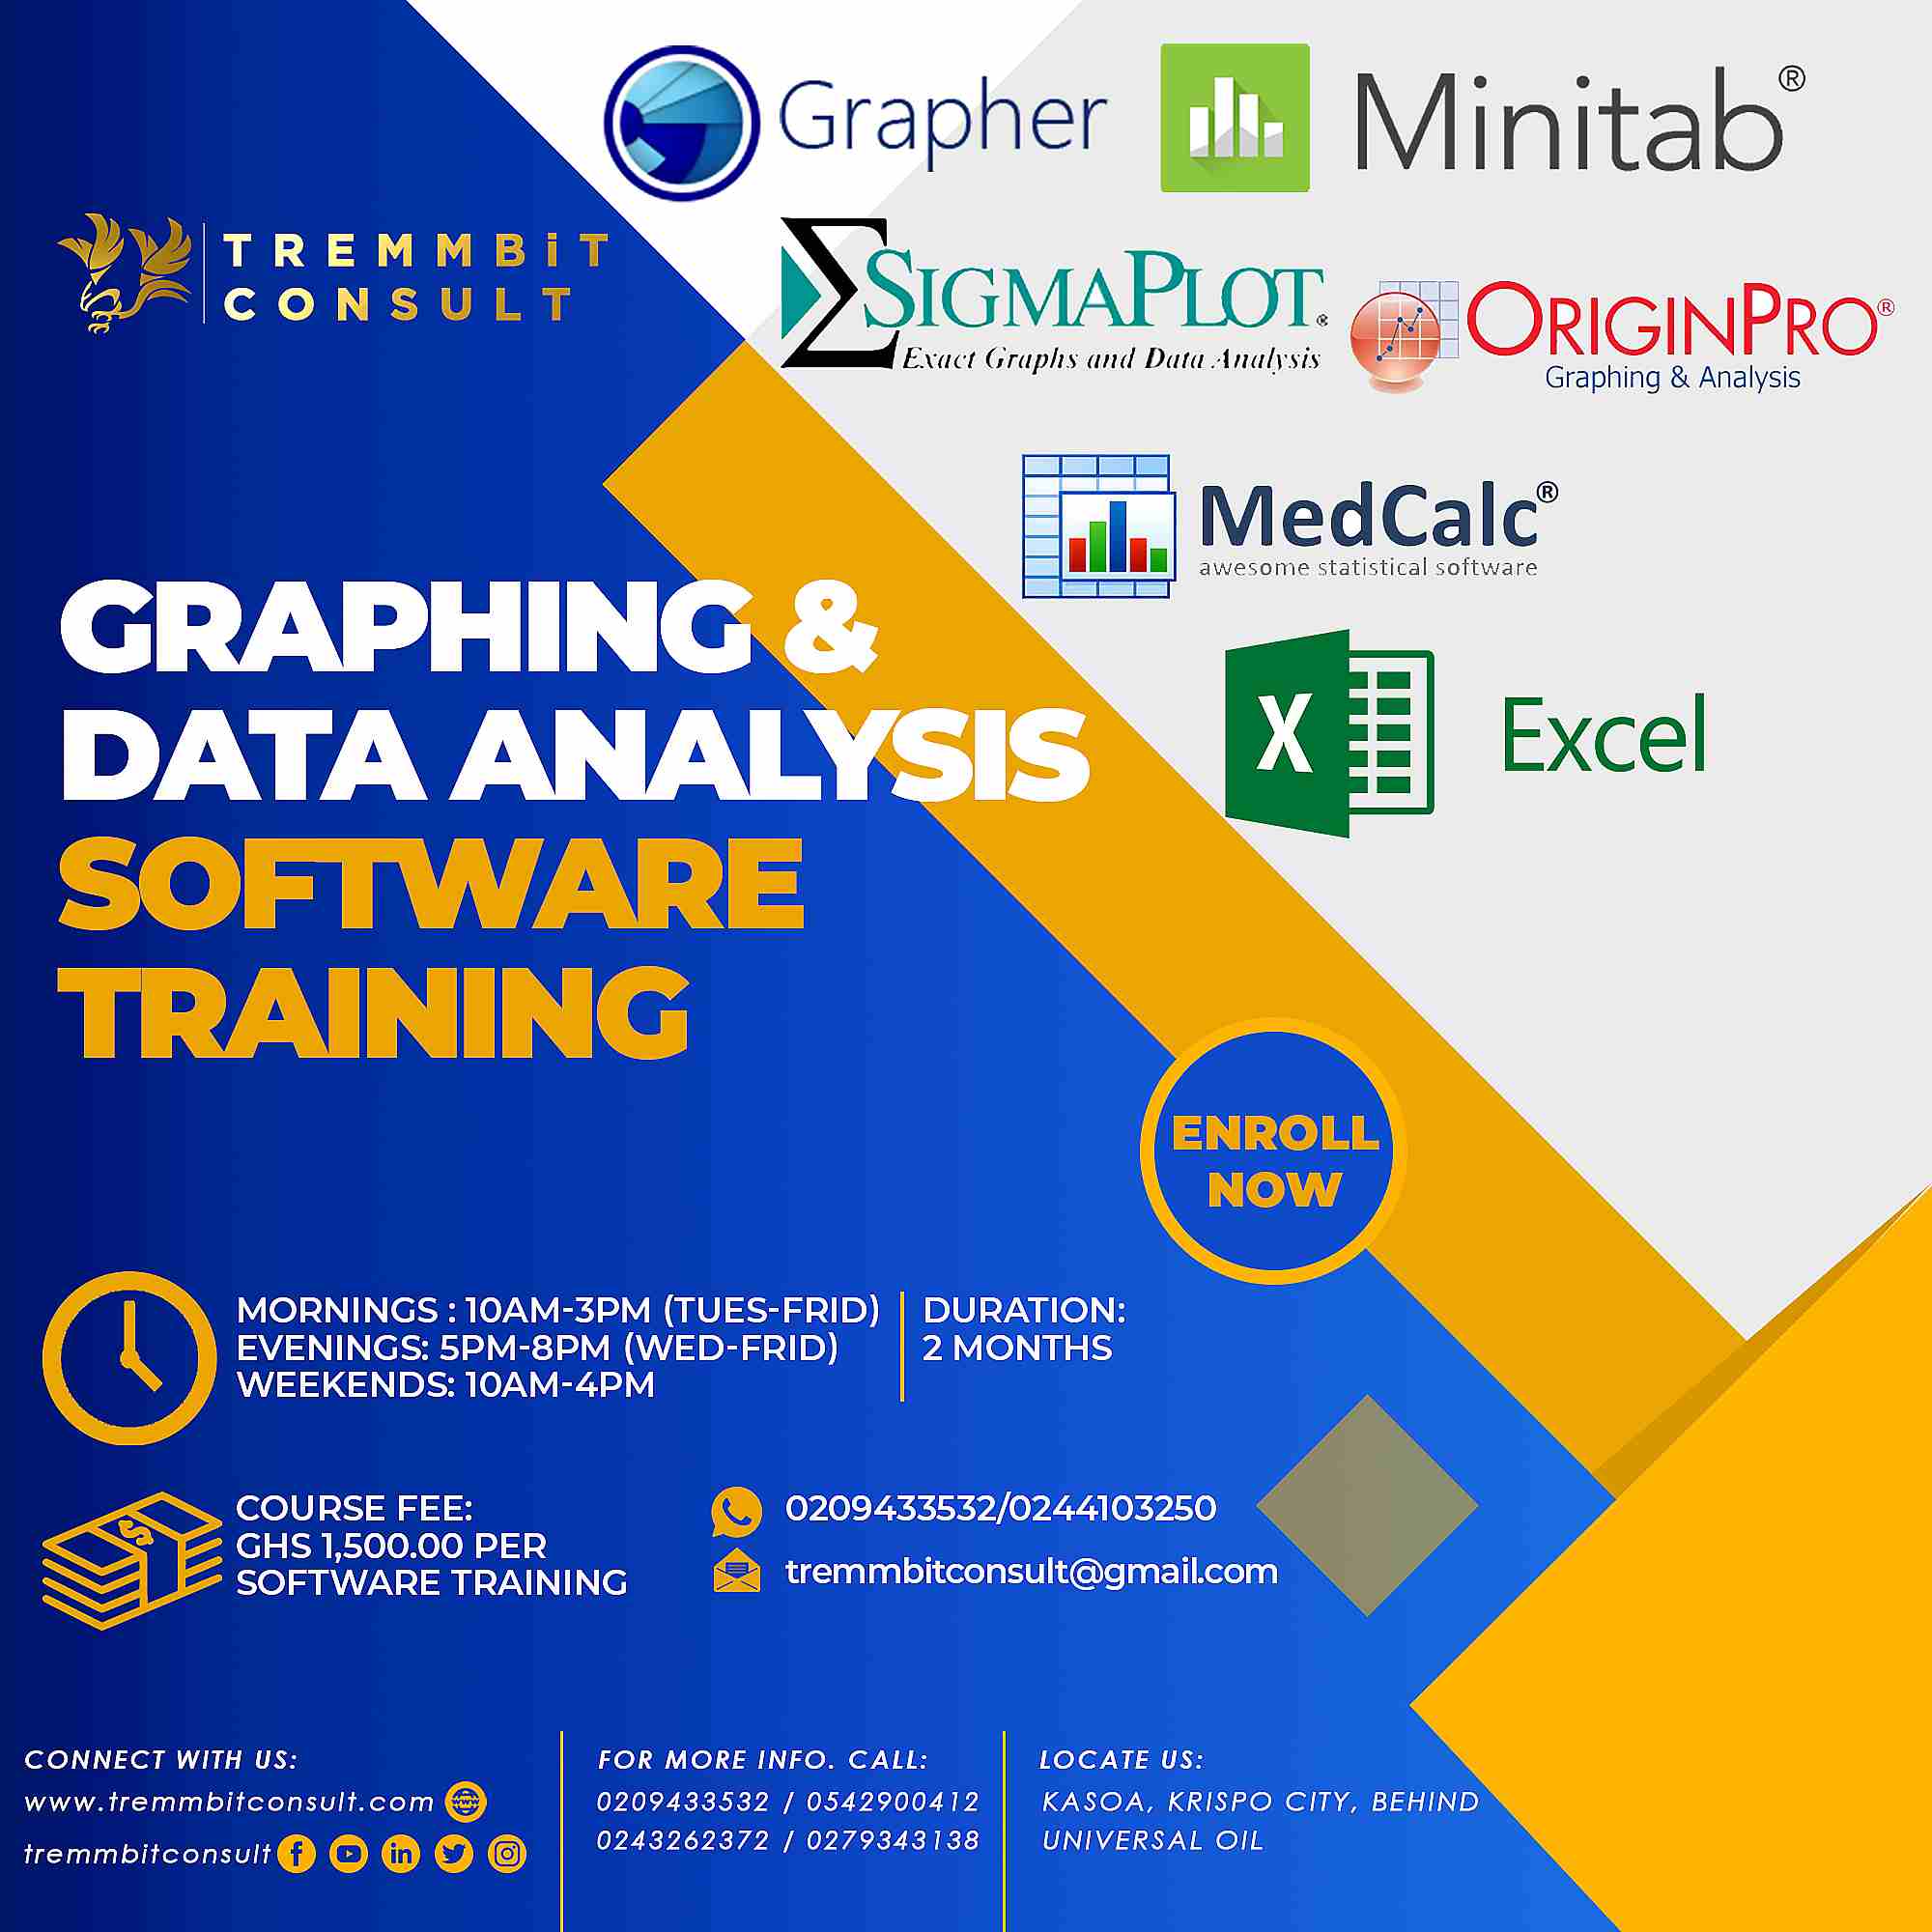 GRAPHING-&-DATA-ANALYSIS-SOFTWARE-TRAINING_compressed